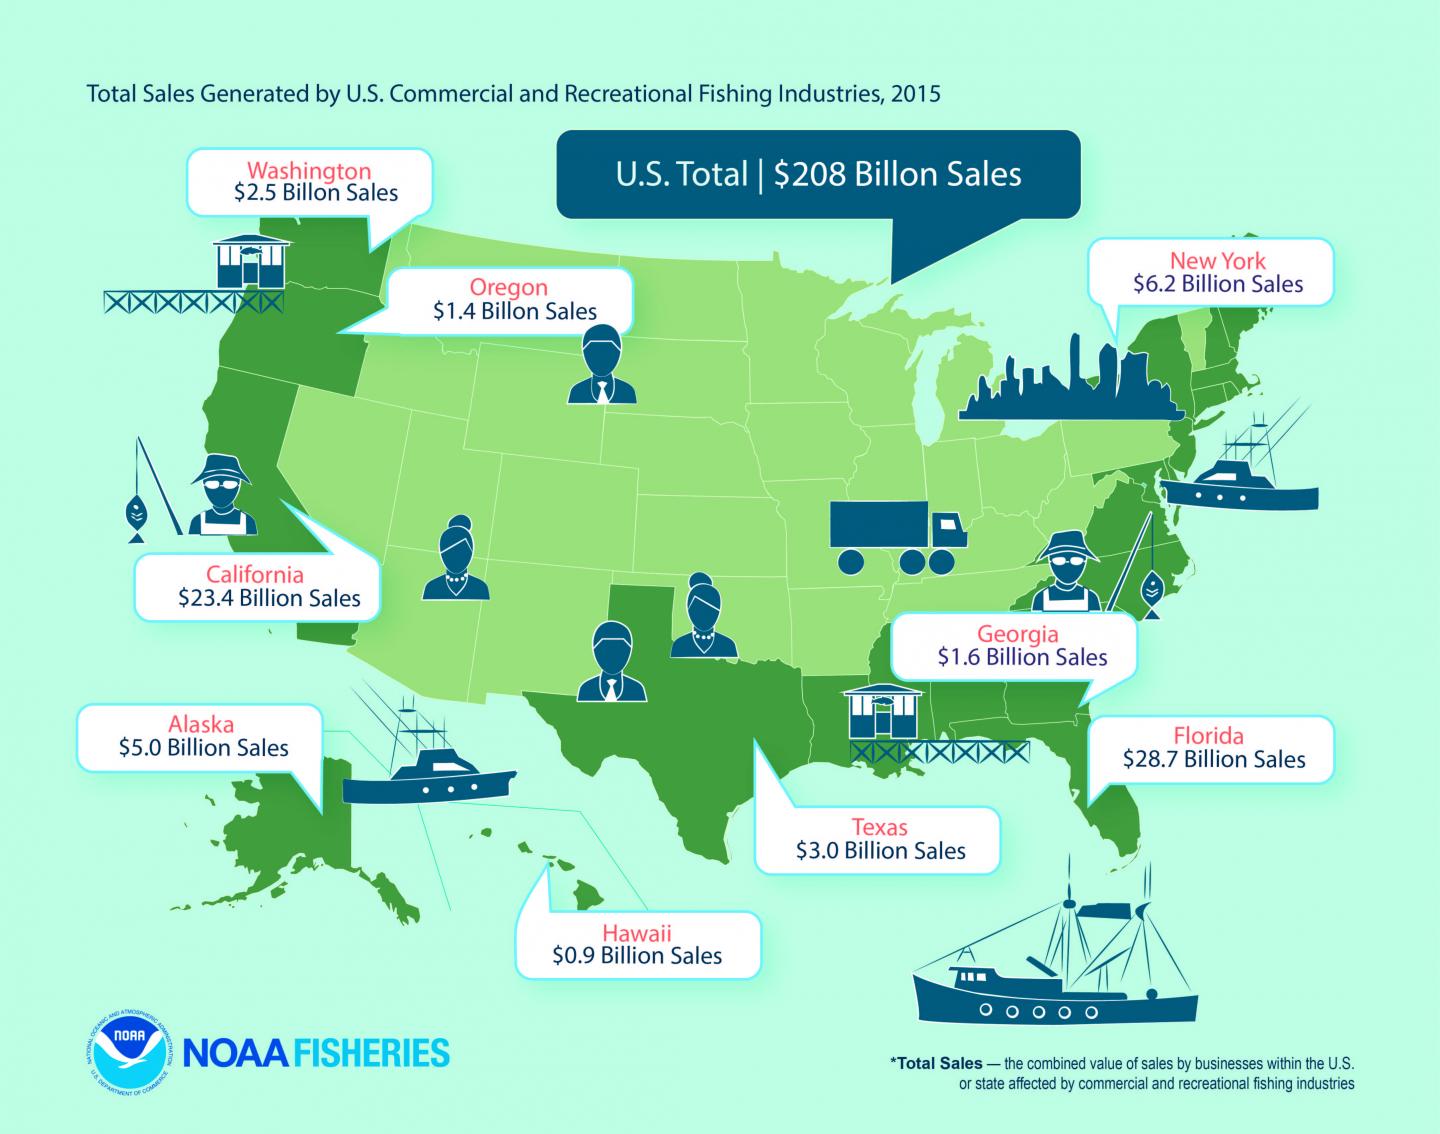 US Fishing Generated More Than $200B in Sales in 2015